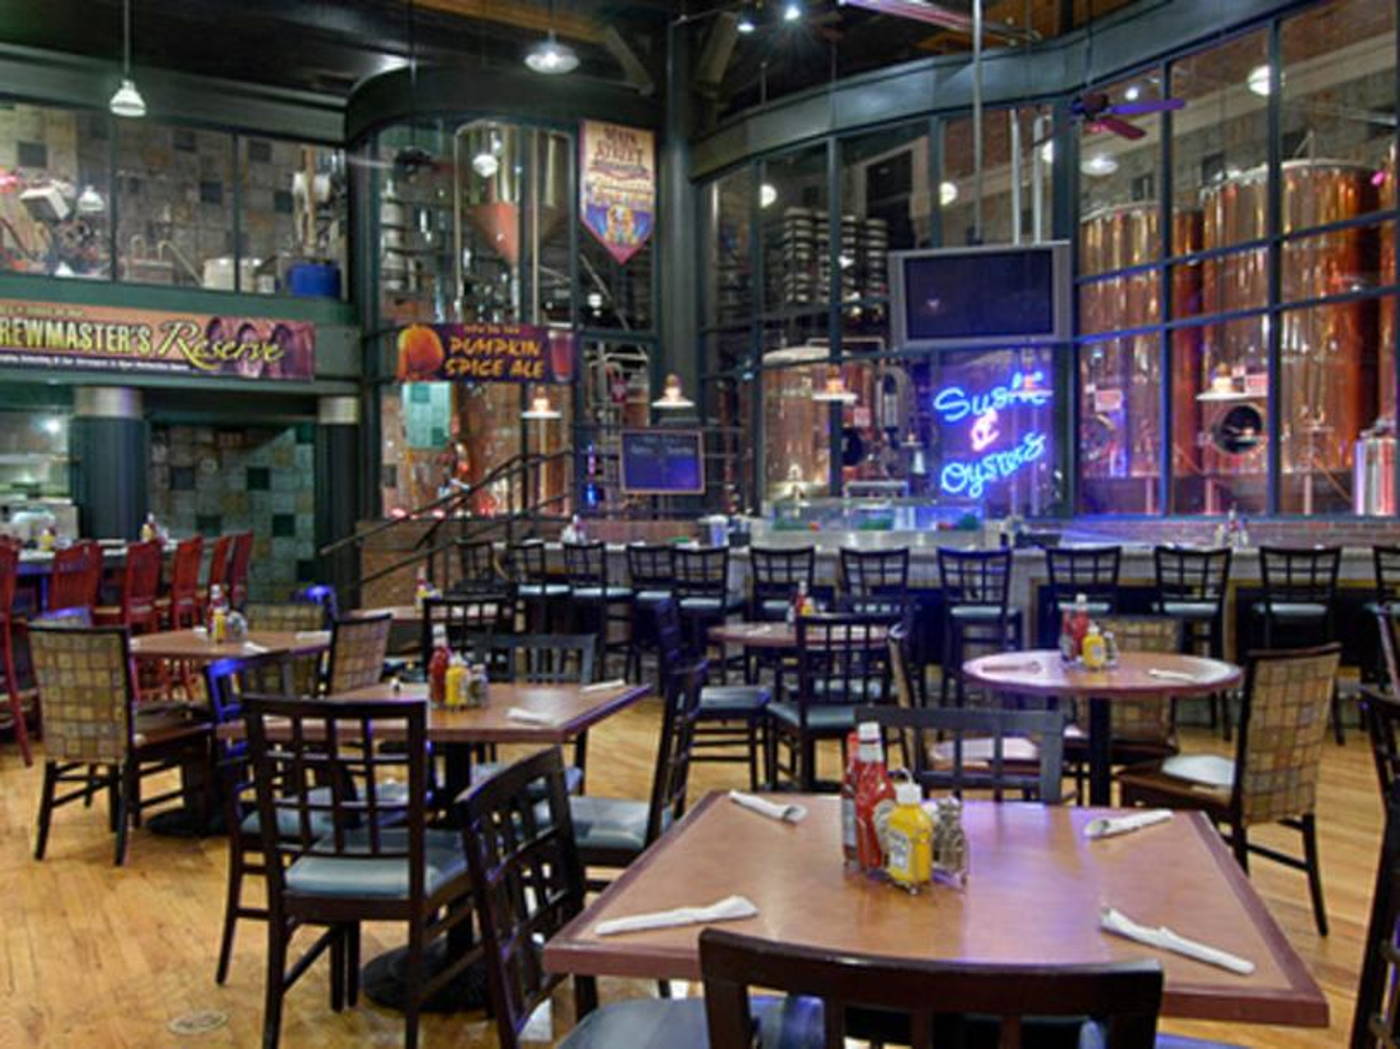 Triple 7 Restaurant and Brewery at Main Street Station Las Vegas